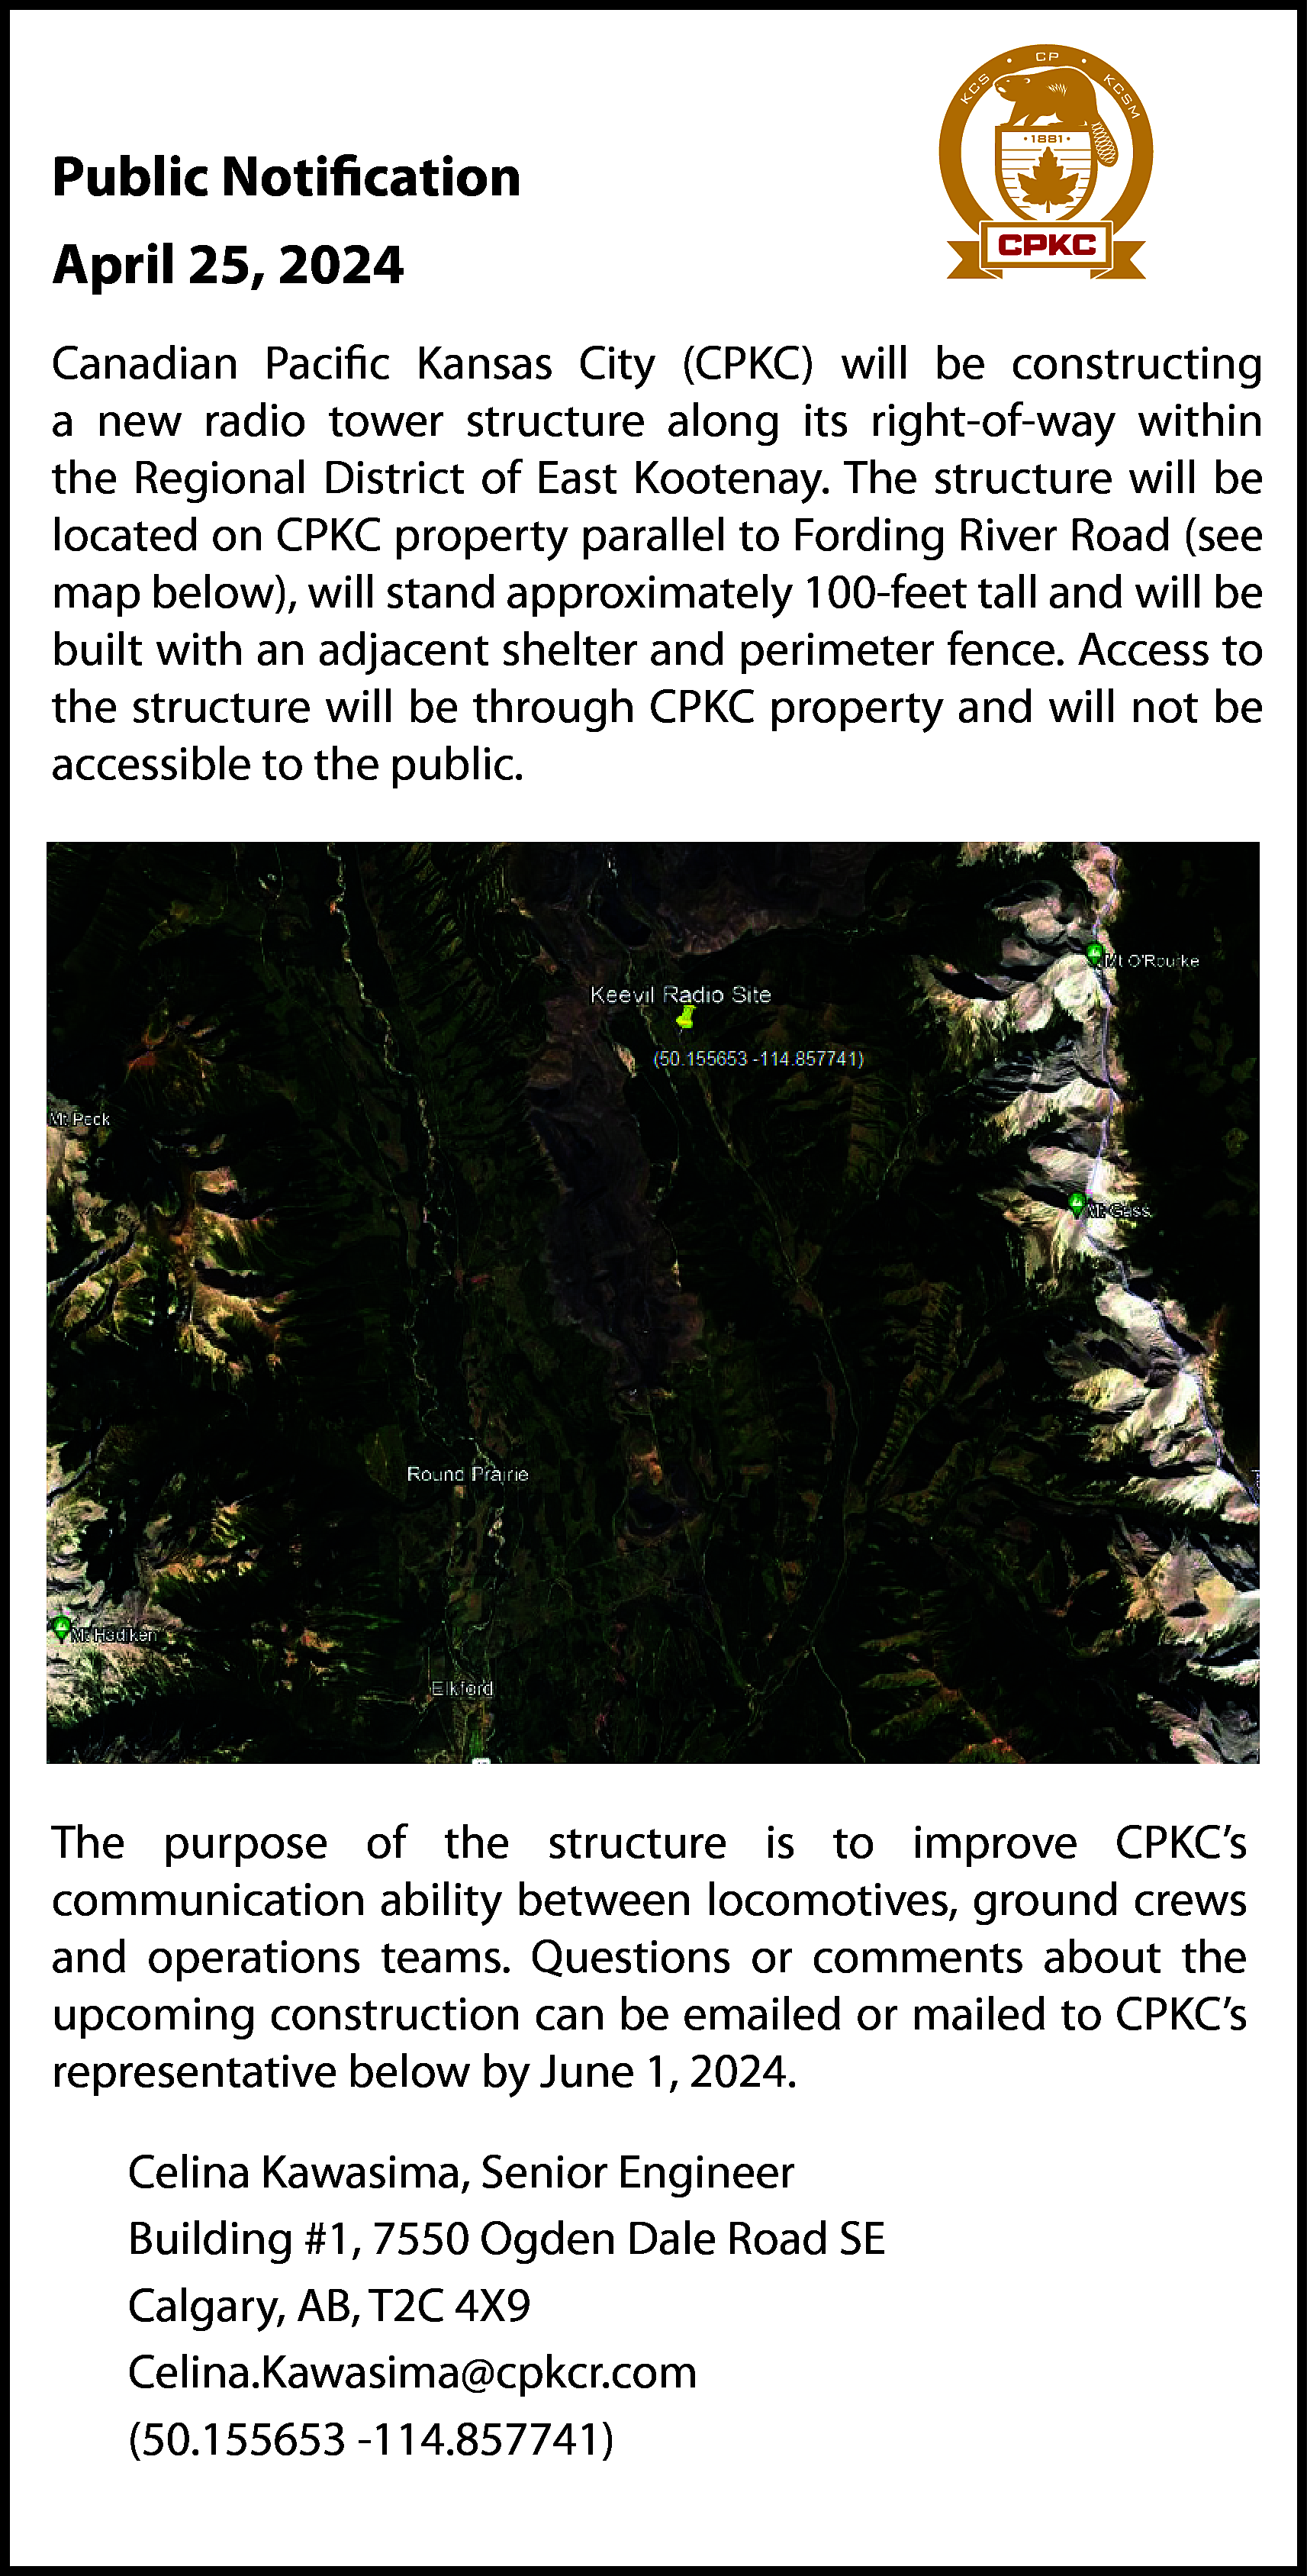 Public Notification <br>April 25, 2024  Public Notification  April 25, 2024    Notificat  Canadian Pacific Kansas City (CPKC) will Public  be constructing  April 18, 2024  a new radio tower structure along its right-of-way  within  the Regional District of East Kootenay. The structure will be  located on CPKC property parallel to FordingCanadian  River RoadPacific  (see  map below), will stand approximately 100-feet  tall  and  will  be a  tower structure  built with an adjacent shelter and perimeter fence. Access to  Kootenay. The st  the structure will be through CPKC property and will not be  Fording River Ro  accessible to the public.    tall and will be bu  Access to the str  accessible to the    The purpose of the structure is to improve CPKC’s  communication ability between locomotives, ground crews  and operations teams. Questions or comments about the  upcoming construction can be emailed or mailed to CPKC’s  representative below by June 1, 2024.  Celina Kawasima, Senior Engineer  Building #1, 7550 Ogden Dale Road SE  Calgary, AB, T2C 4X9  Celina.Kawasima@cpkcr.com  (50.155653 -114.857741)    The purpose of t  ability between lo  Questions or com  emailed or maile    Celina Kawas  Building #1, 7    